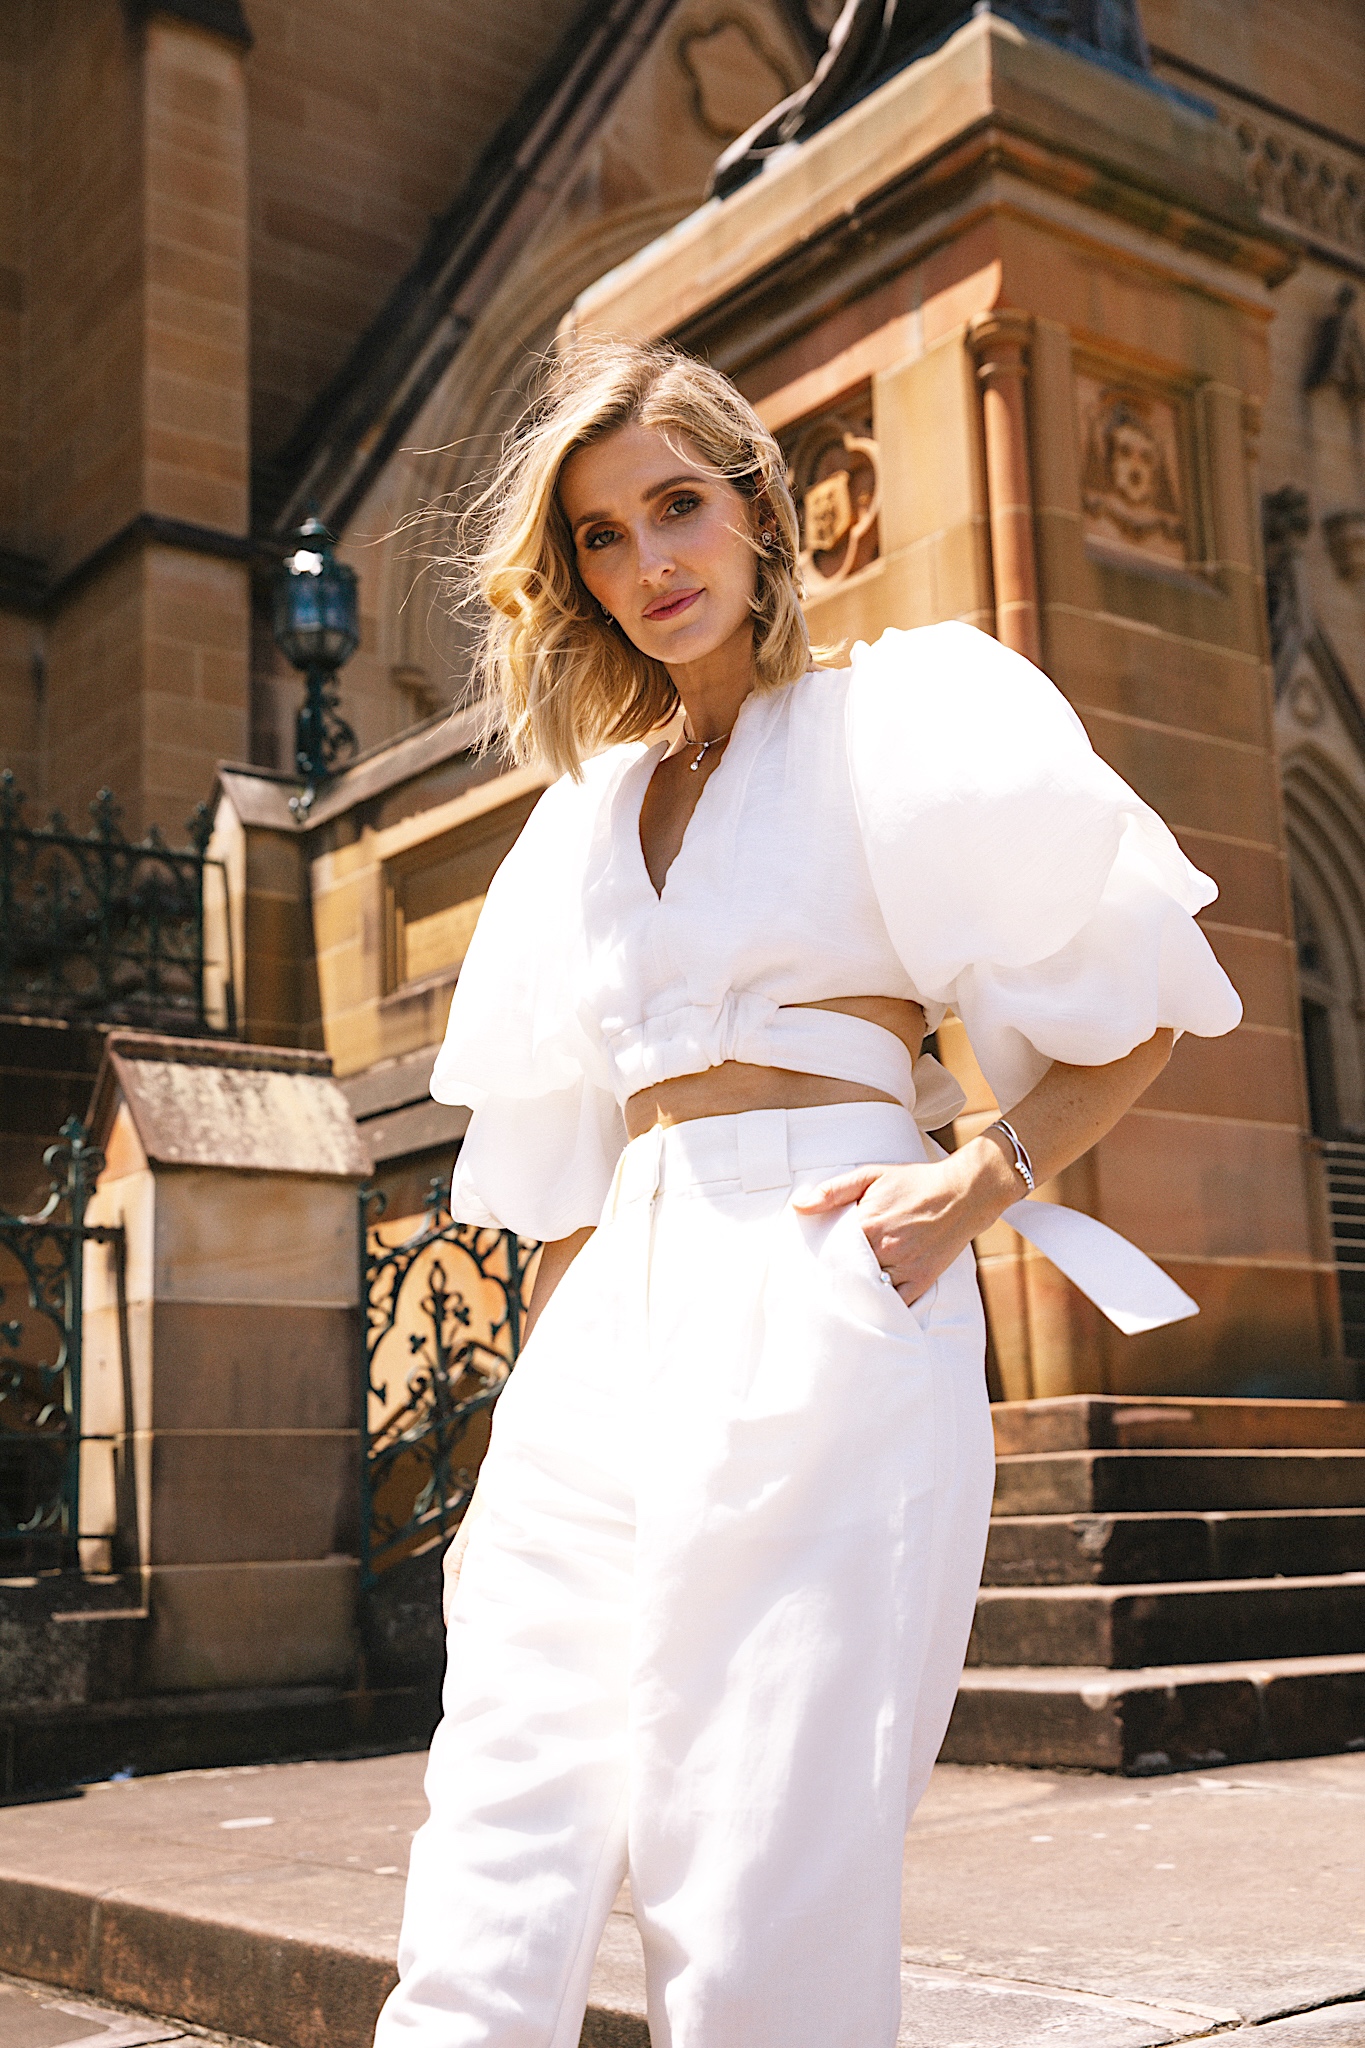 louis vuitton Archives - Page 3 of 3 - Kate Waterhouse